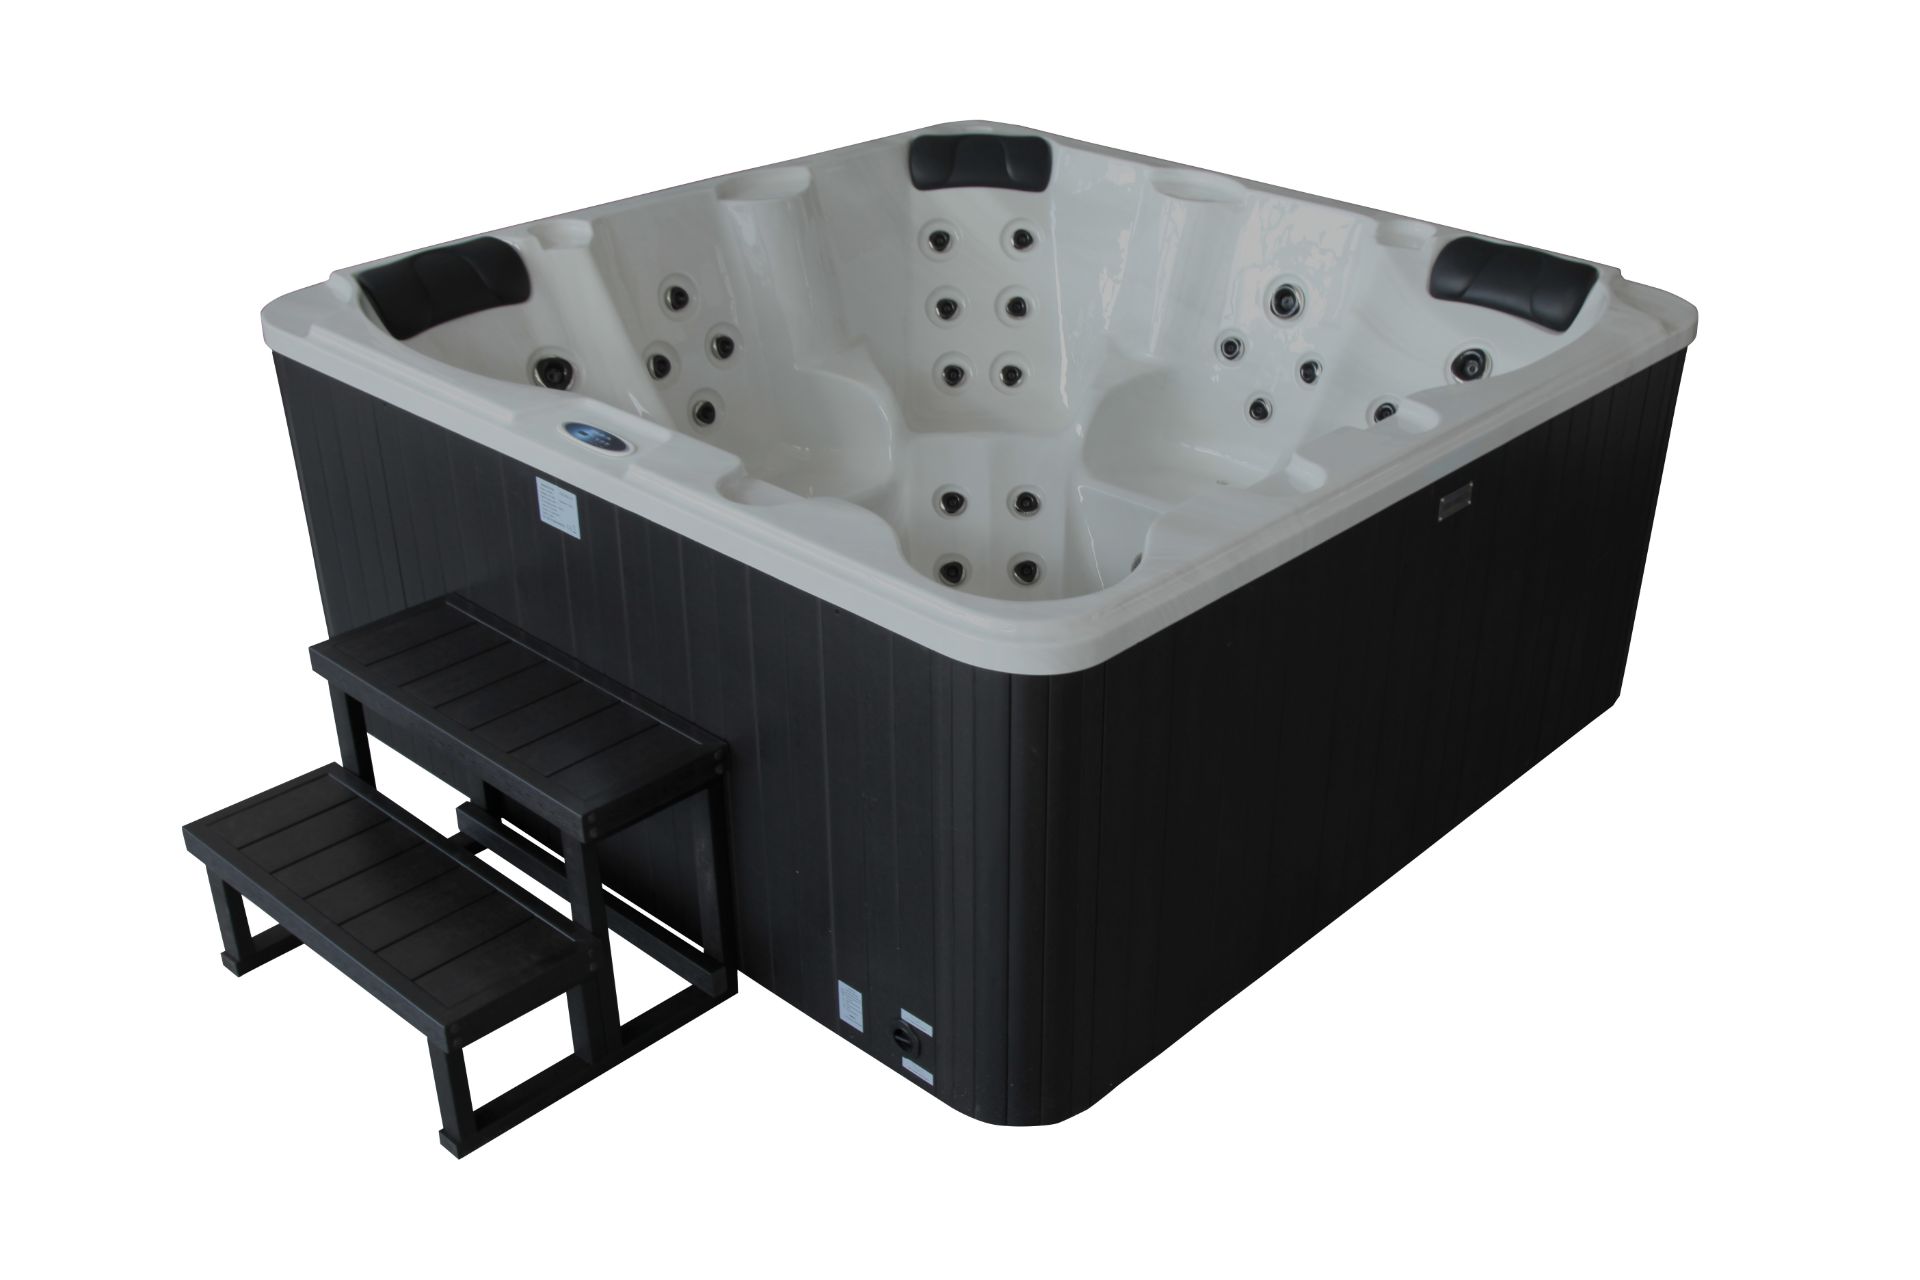 High Quality New Packaged 2016 Hot Tub, Matching Steps, Side, Insulating Cover, Top Usa Running Gear - Image 4 of 5